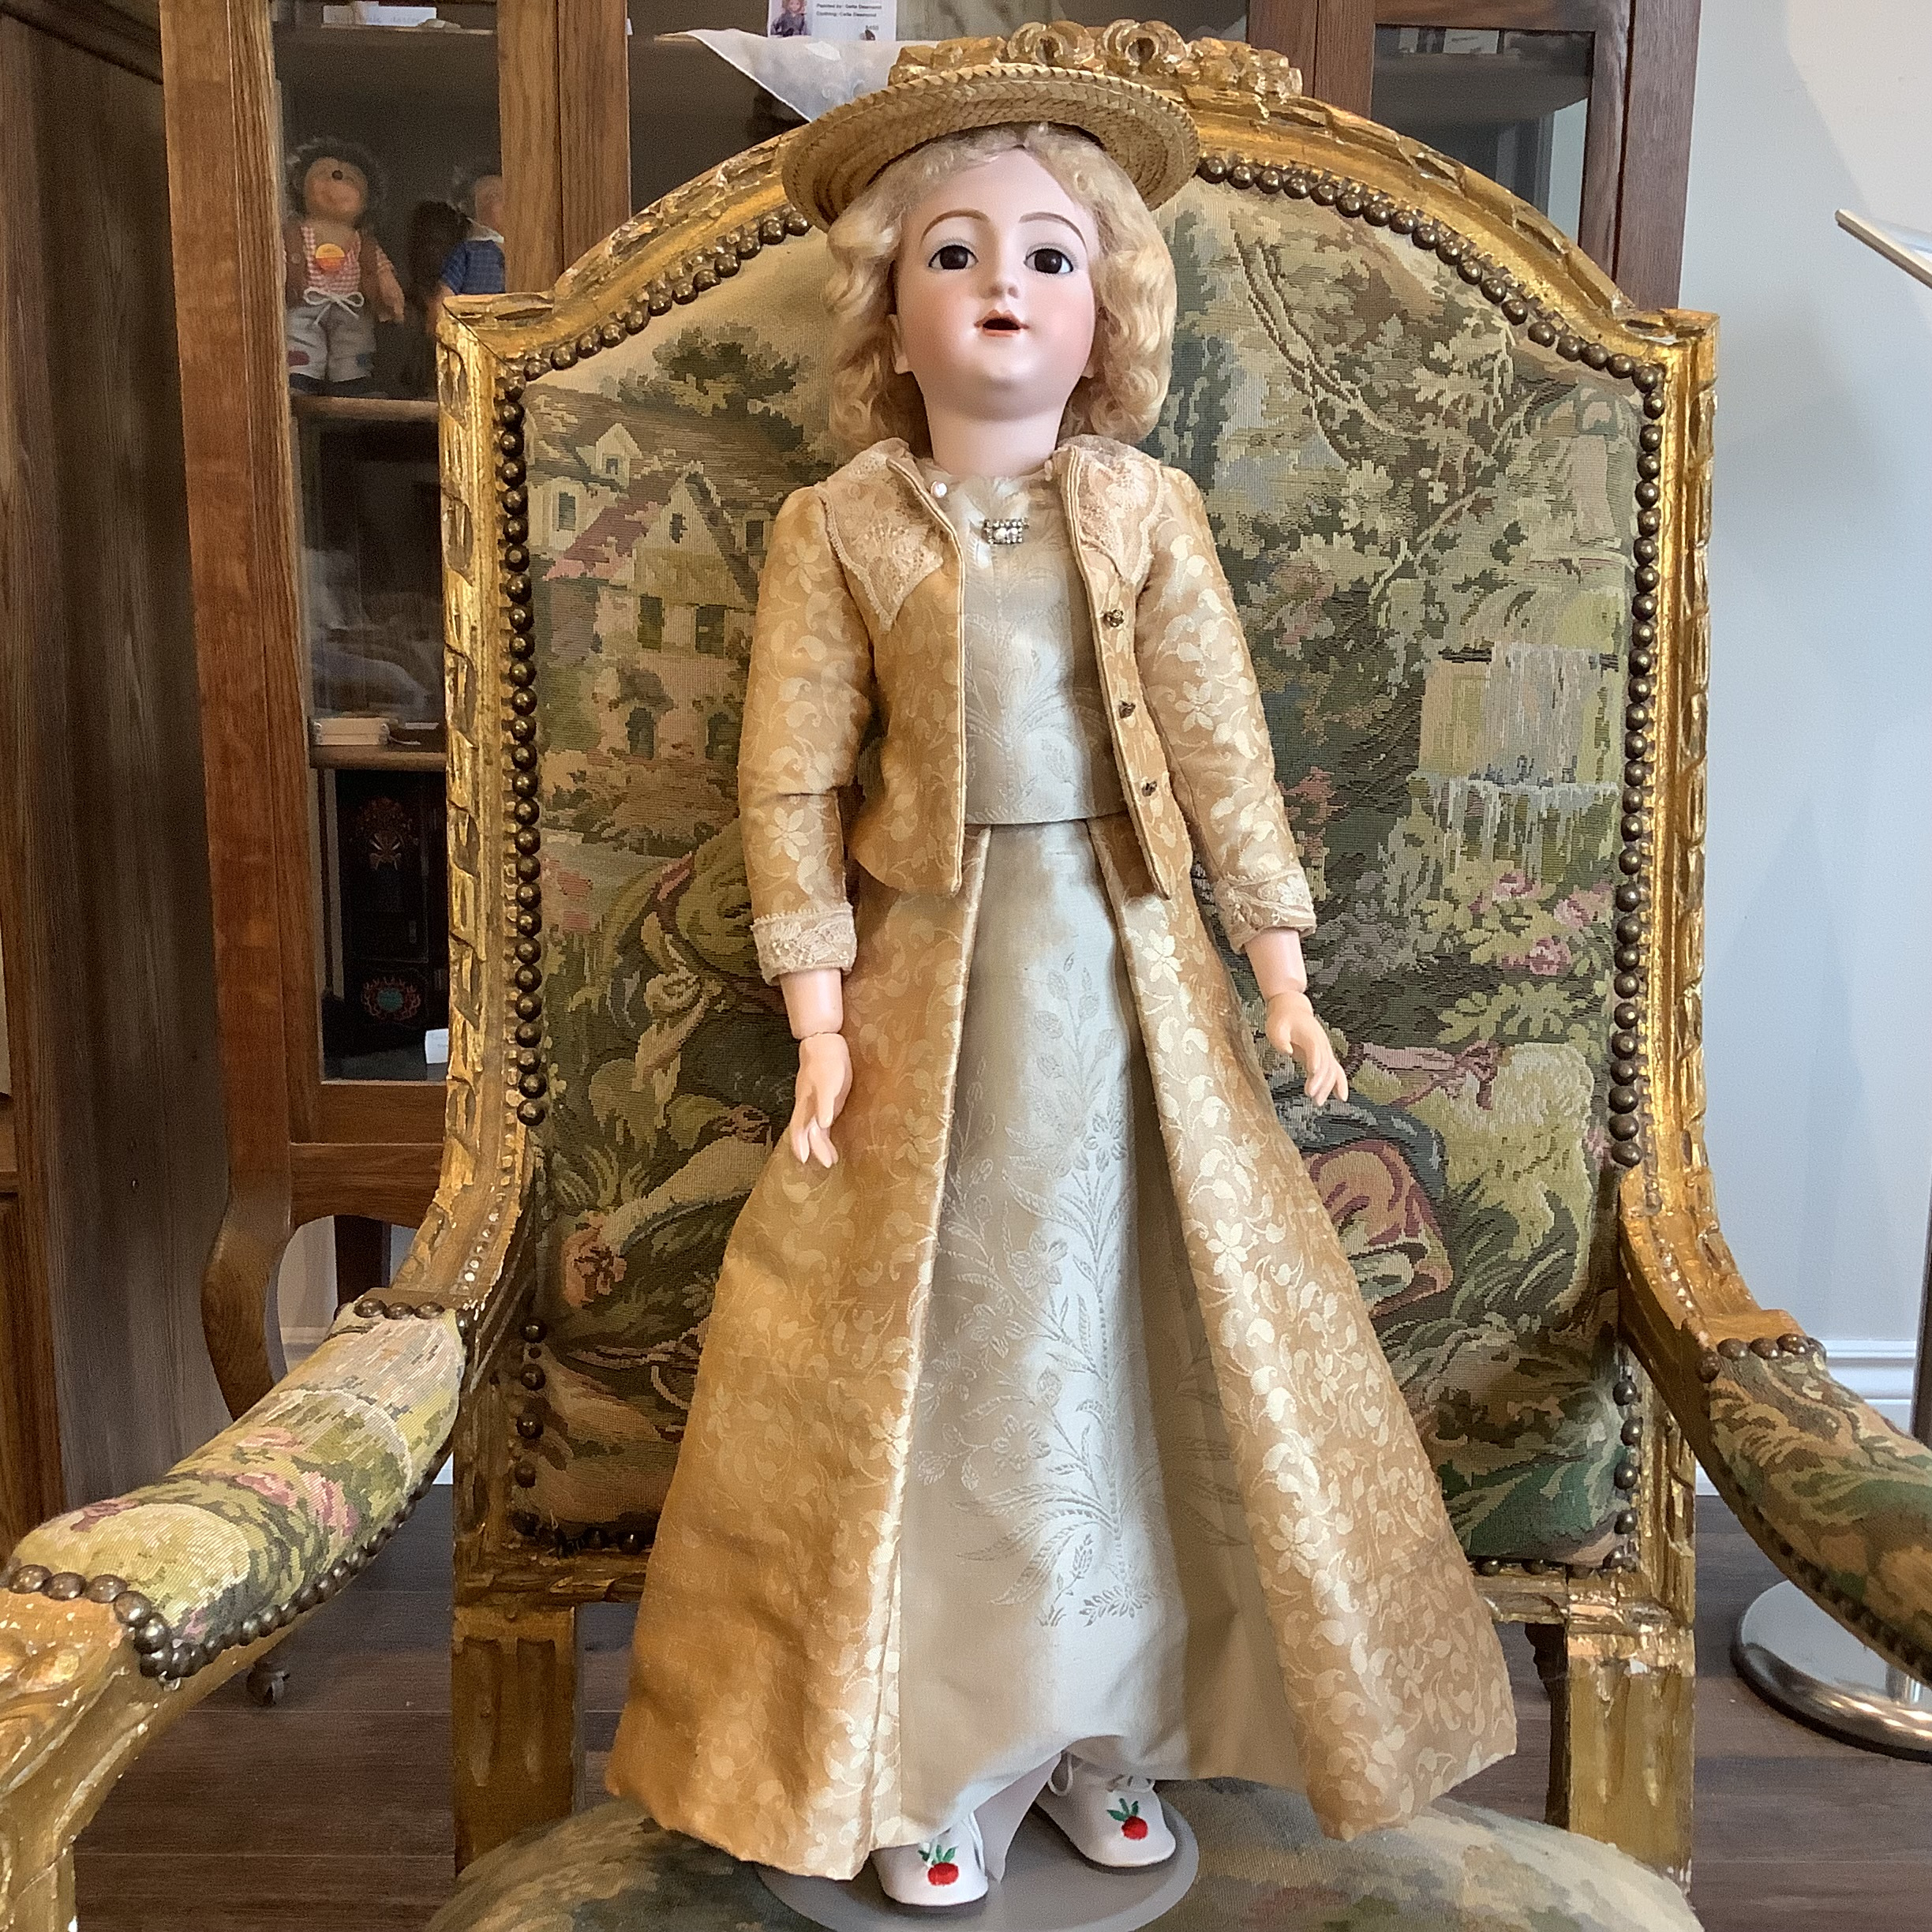 Small, white-haired doll in Tudor hat and short brown dress with lace cuffs.